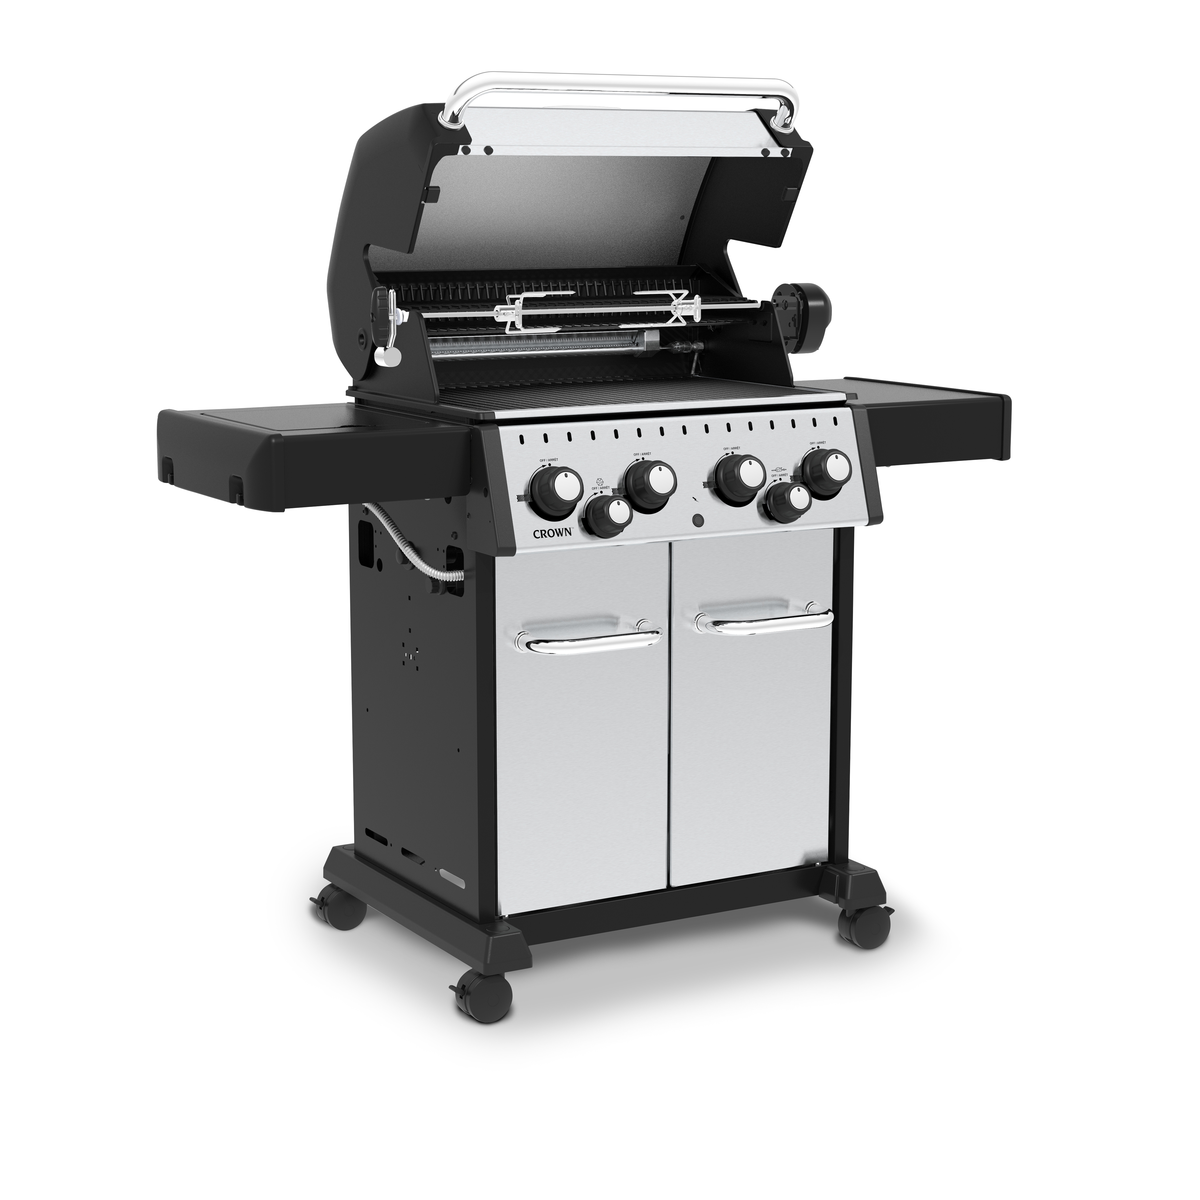 Broil King Crown S490 – Luxe Barbeque Company